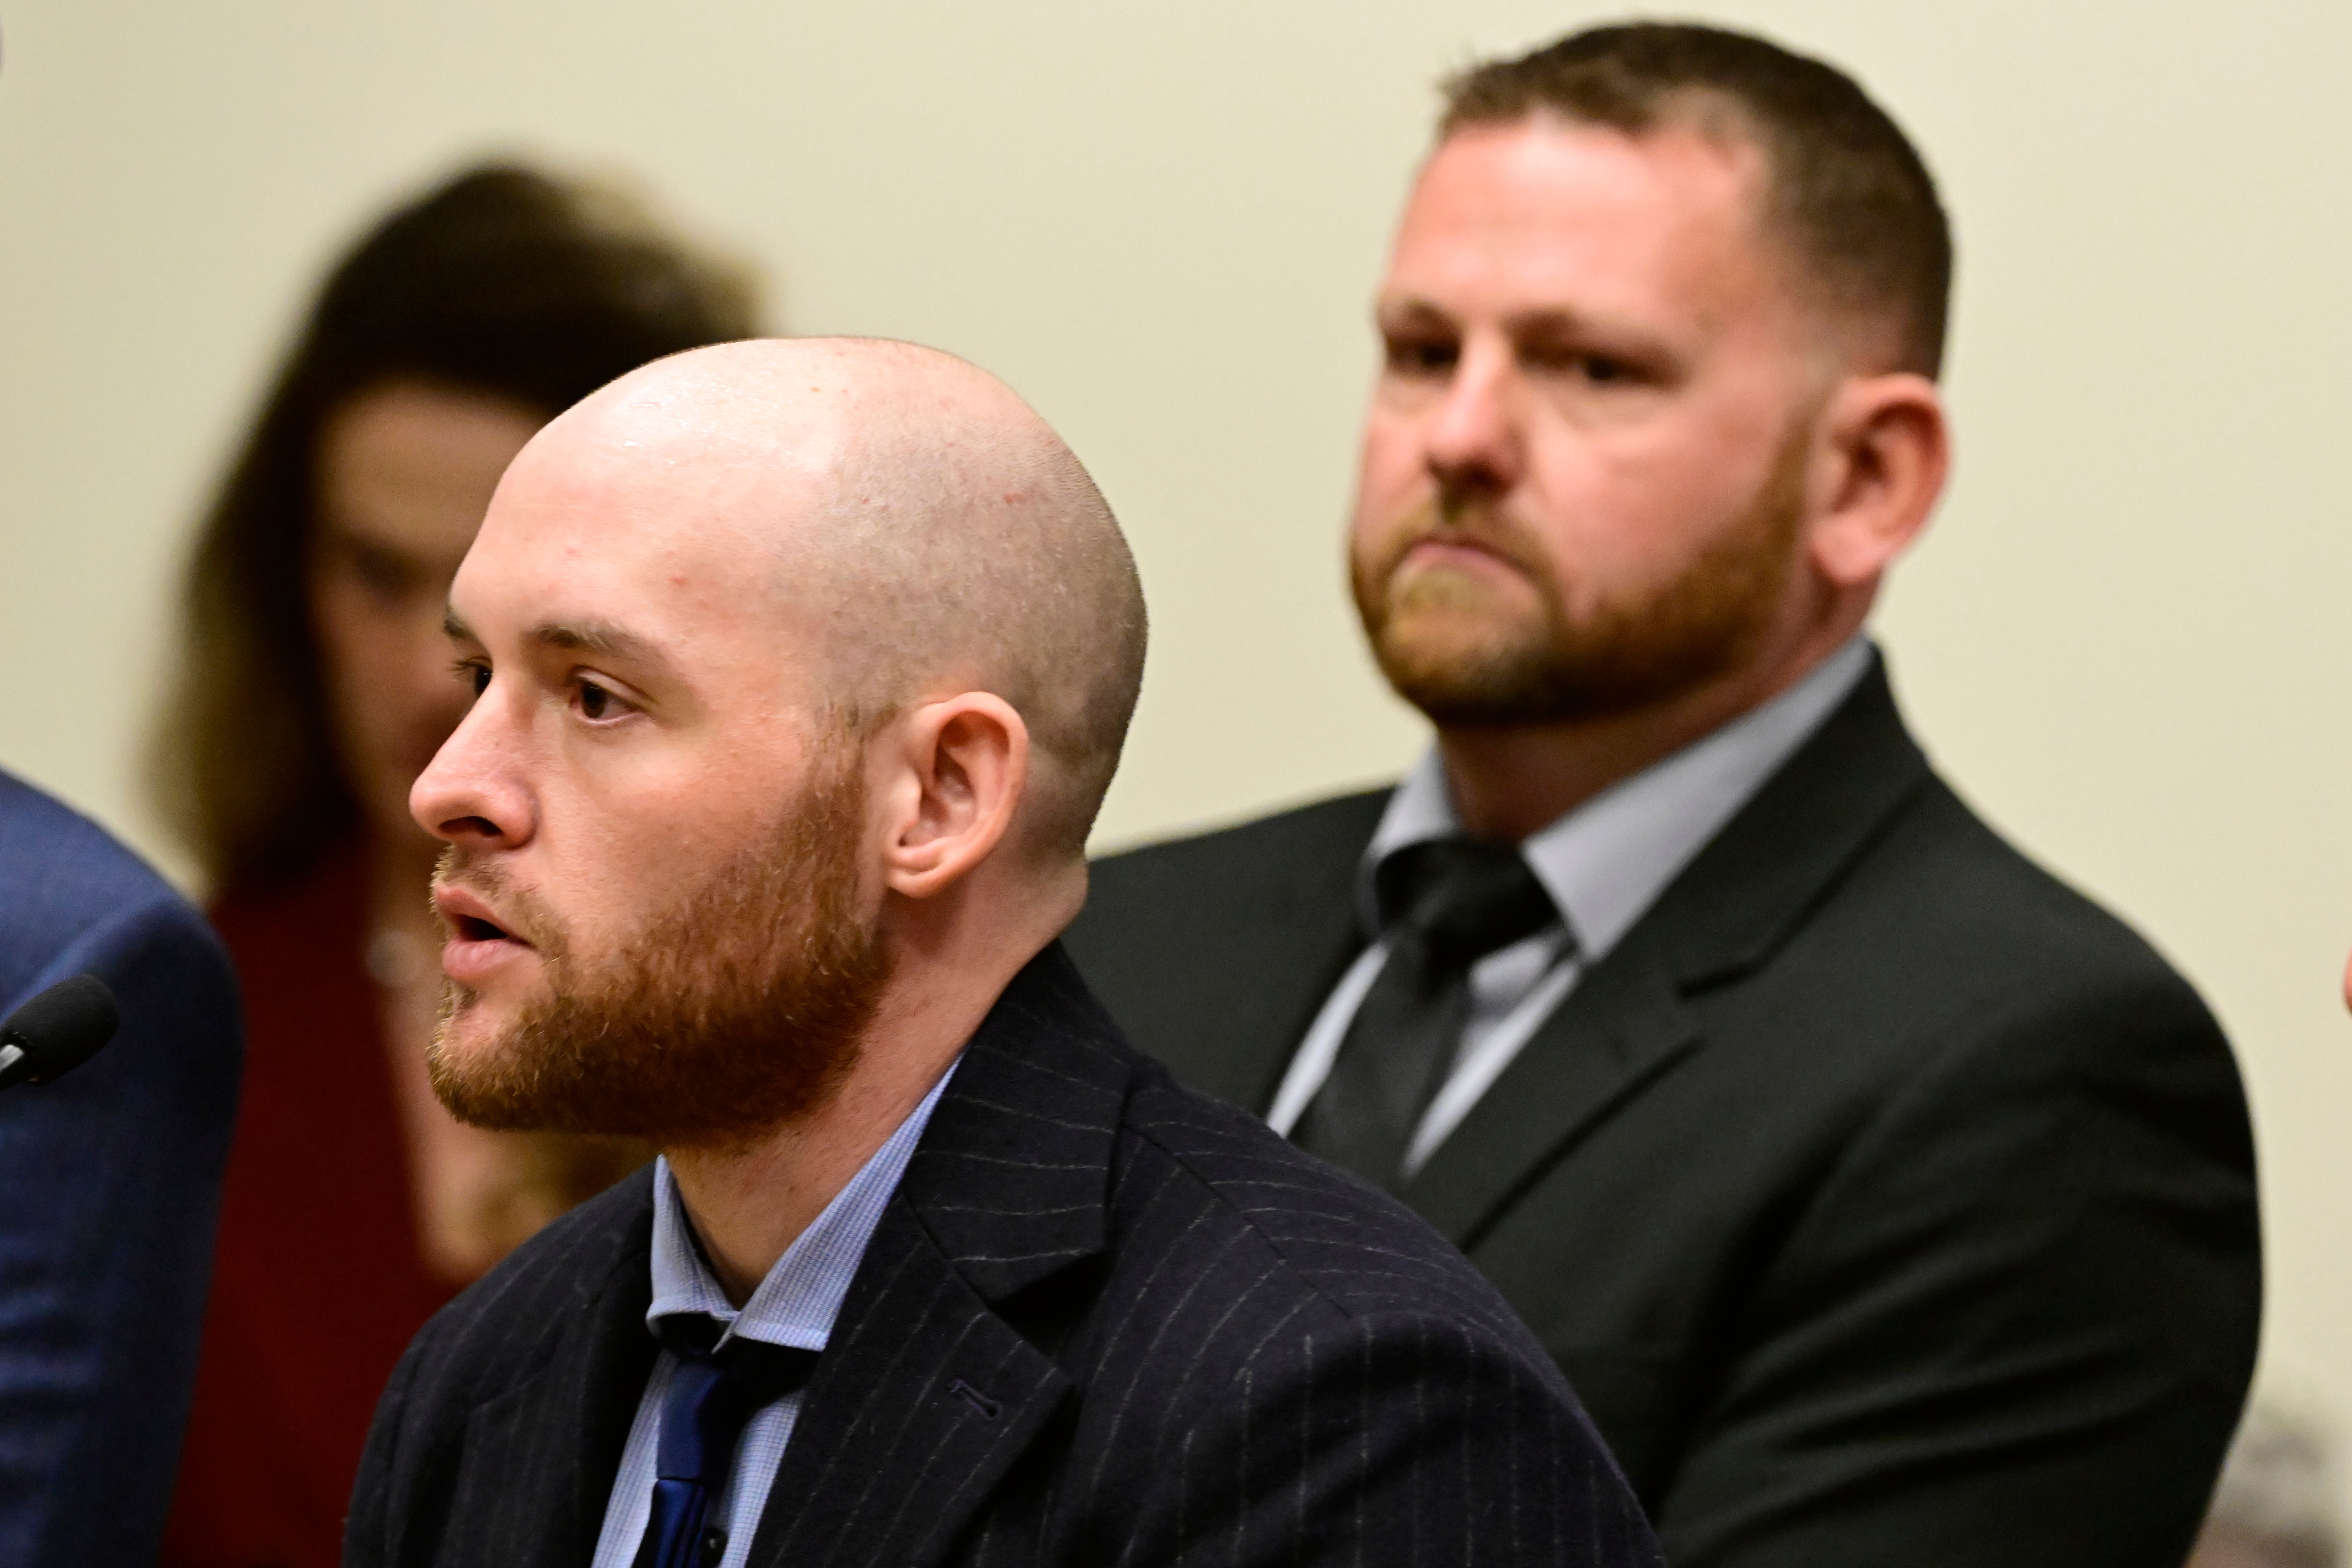 Jason Rosenblatt, left, was acquitted by a jury, while Randy Roedema, right, was found guilty